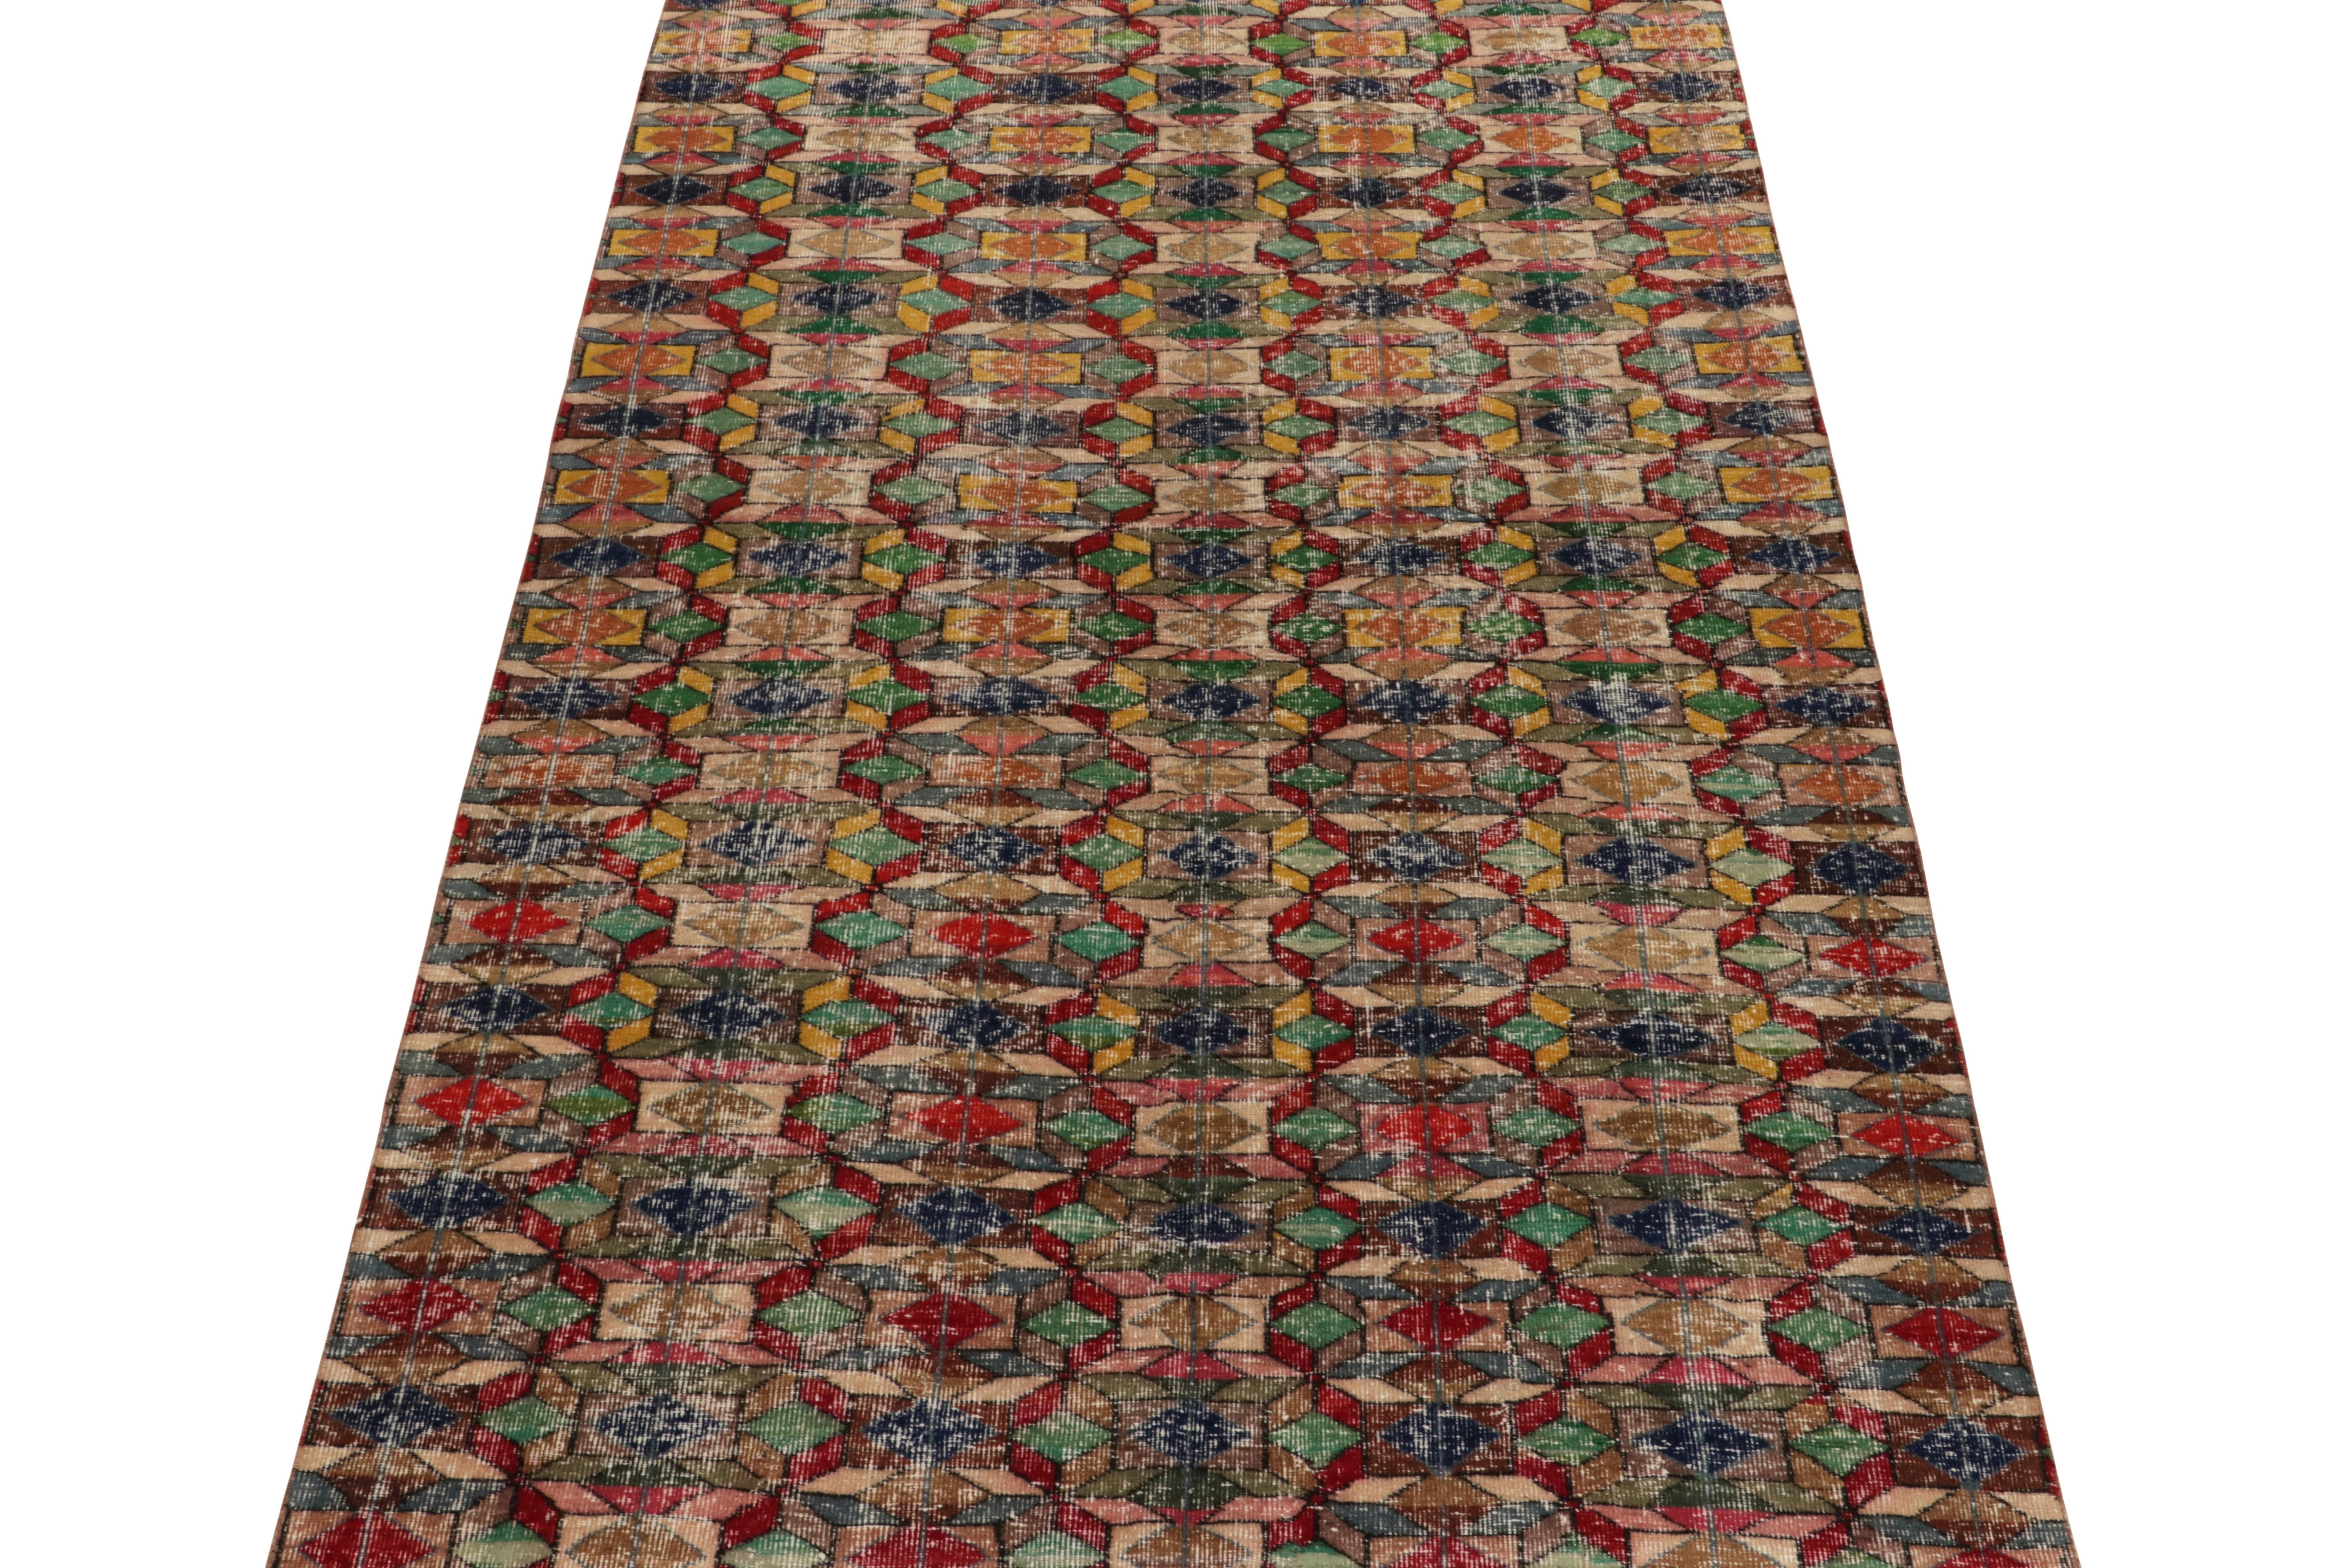 A 6x9 vintage rug from the works of a coveted multidisciplinary Turkish designer, among the latest to join Rug & Kilim’s curated Mid-Century Pasha collection. 

A gorgeous interplay of grass green, ink blue, beige/brown & red complements the